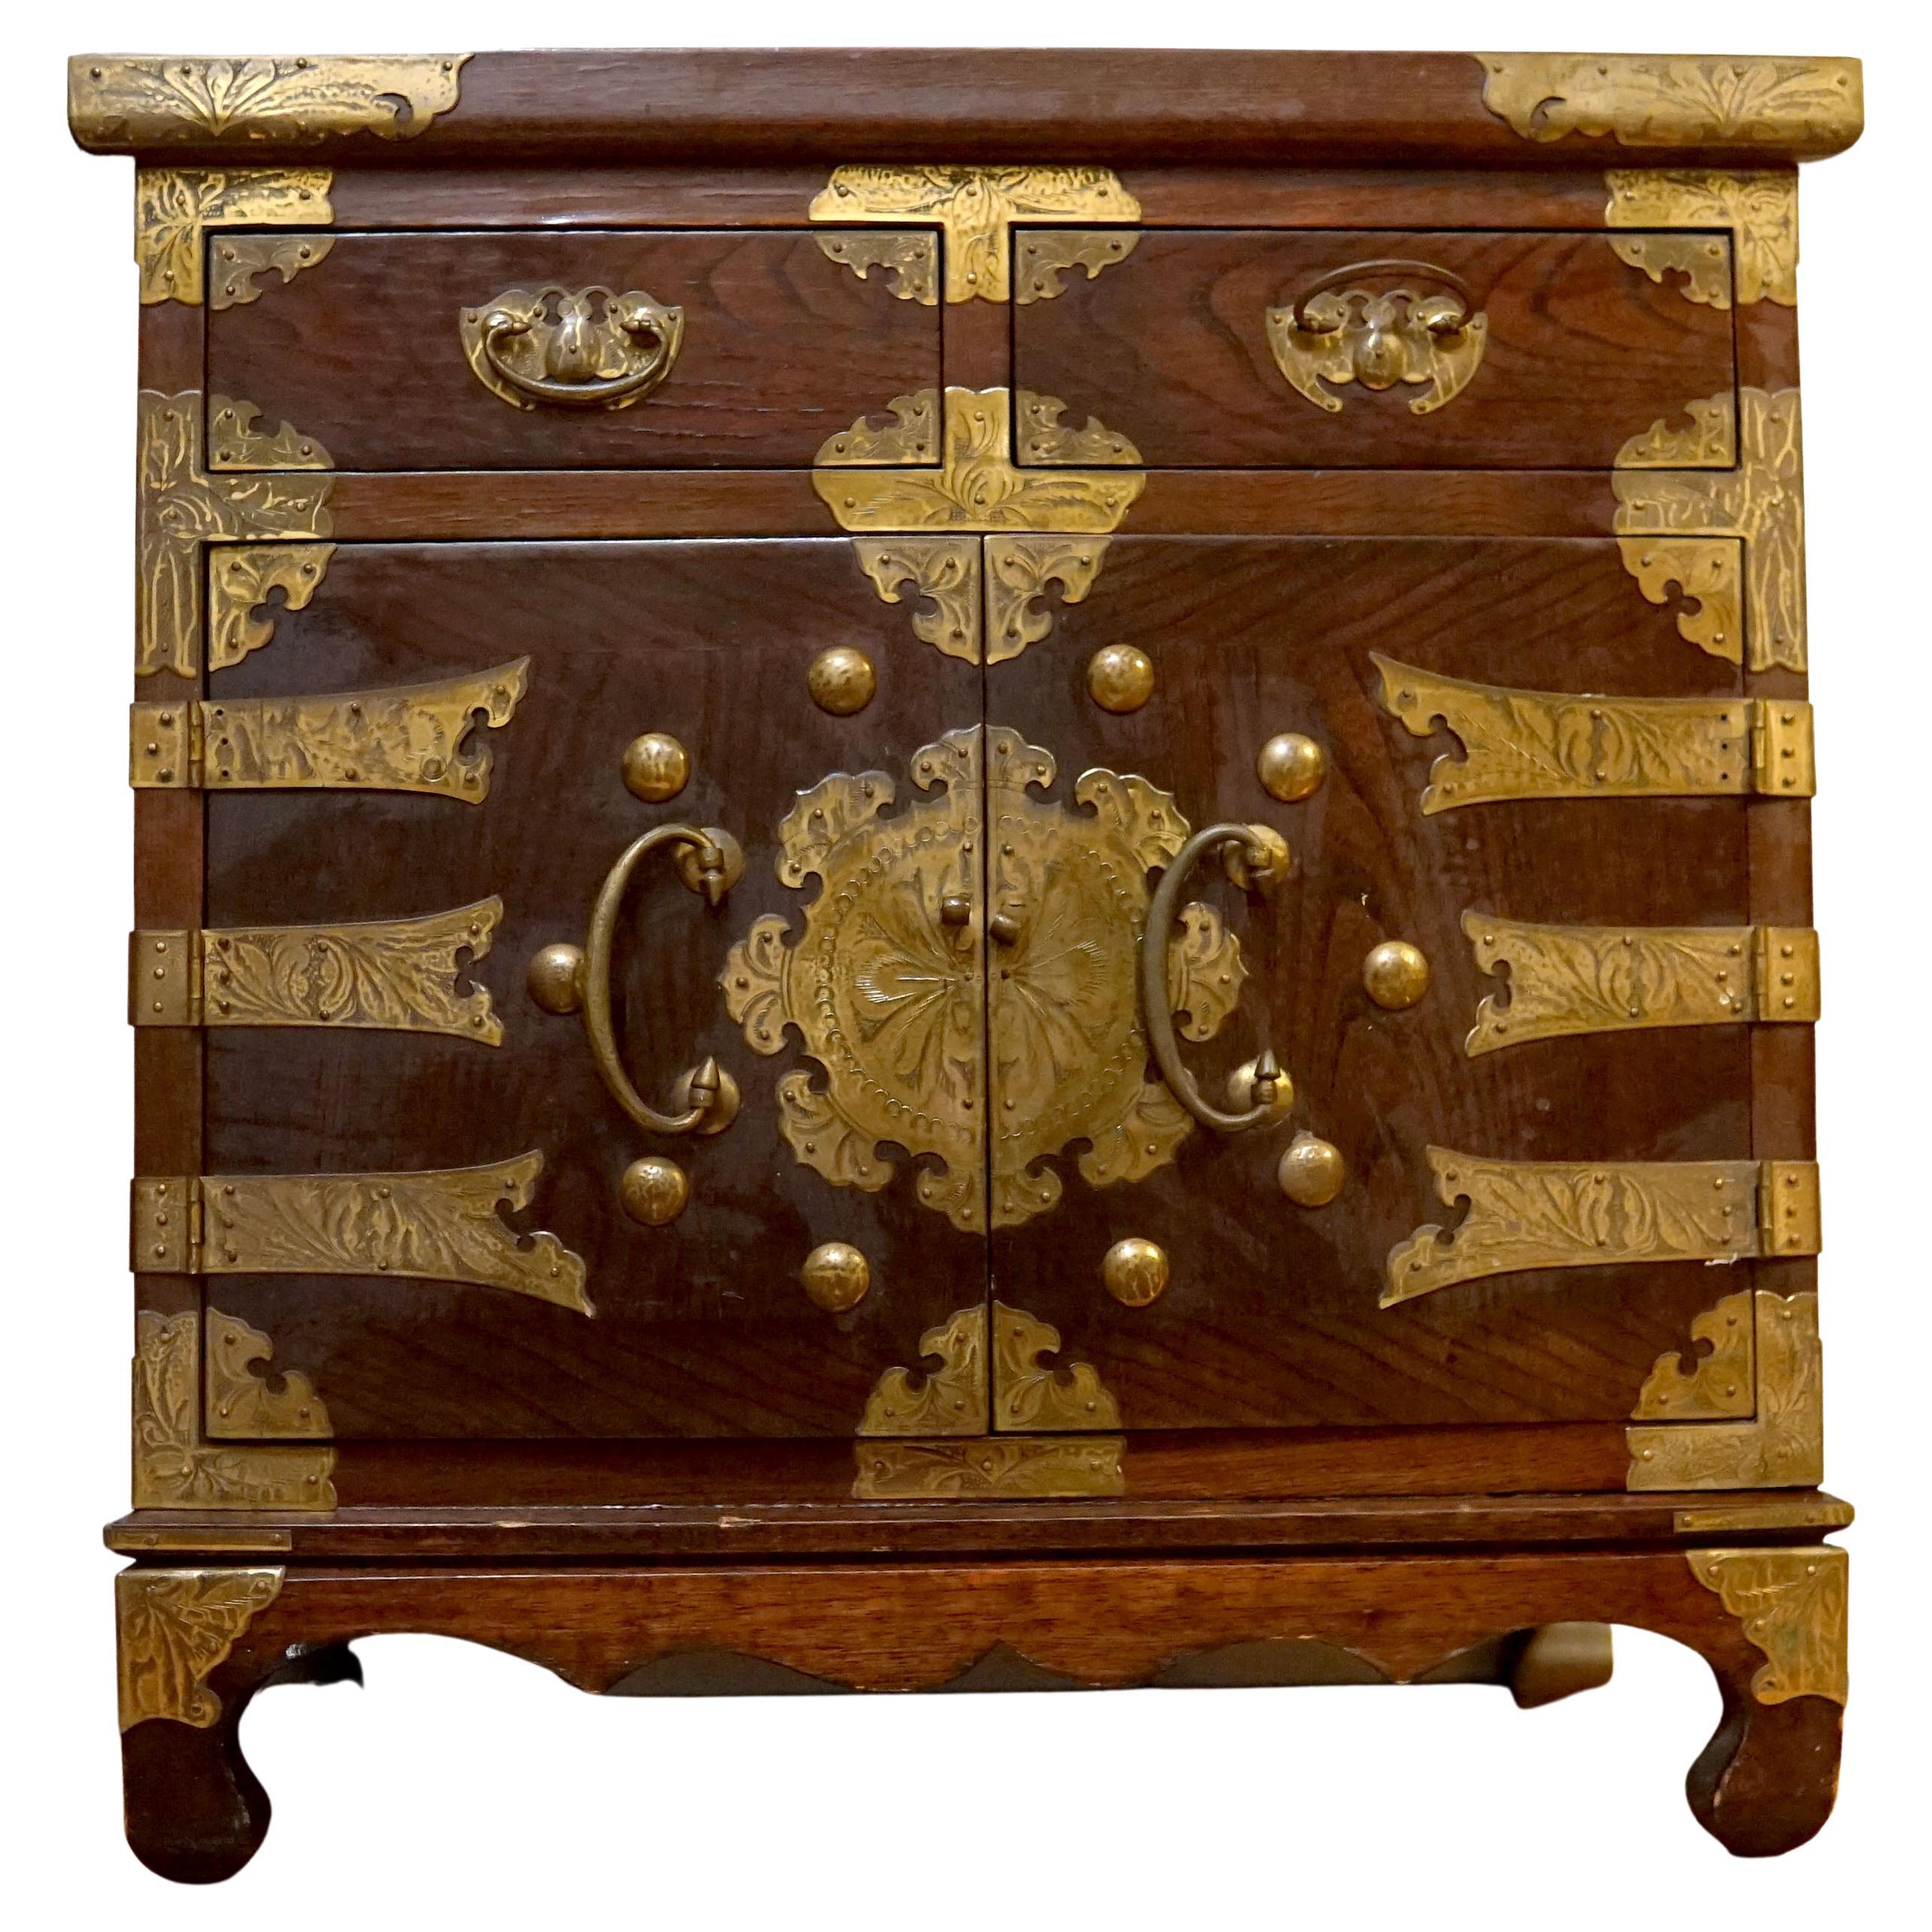 19th Century Elm Wood and Brass Korean Tansu Chest with Drawers